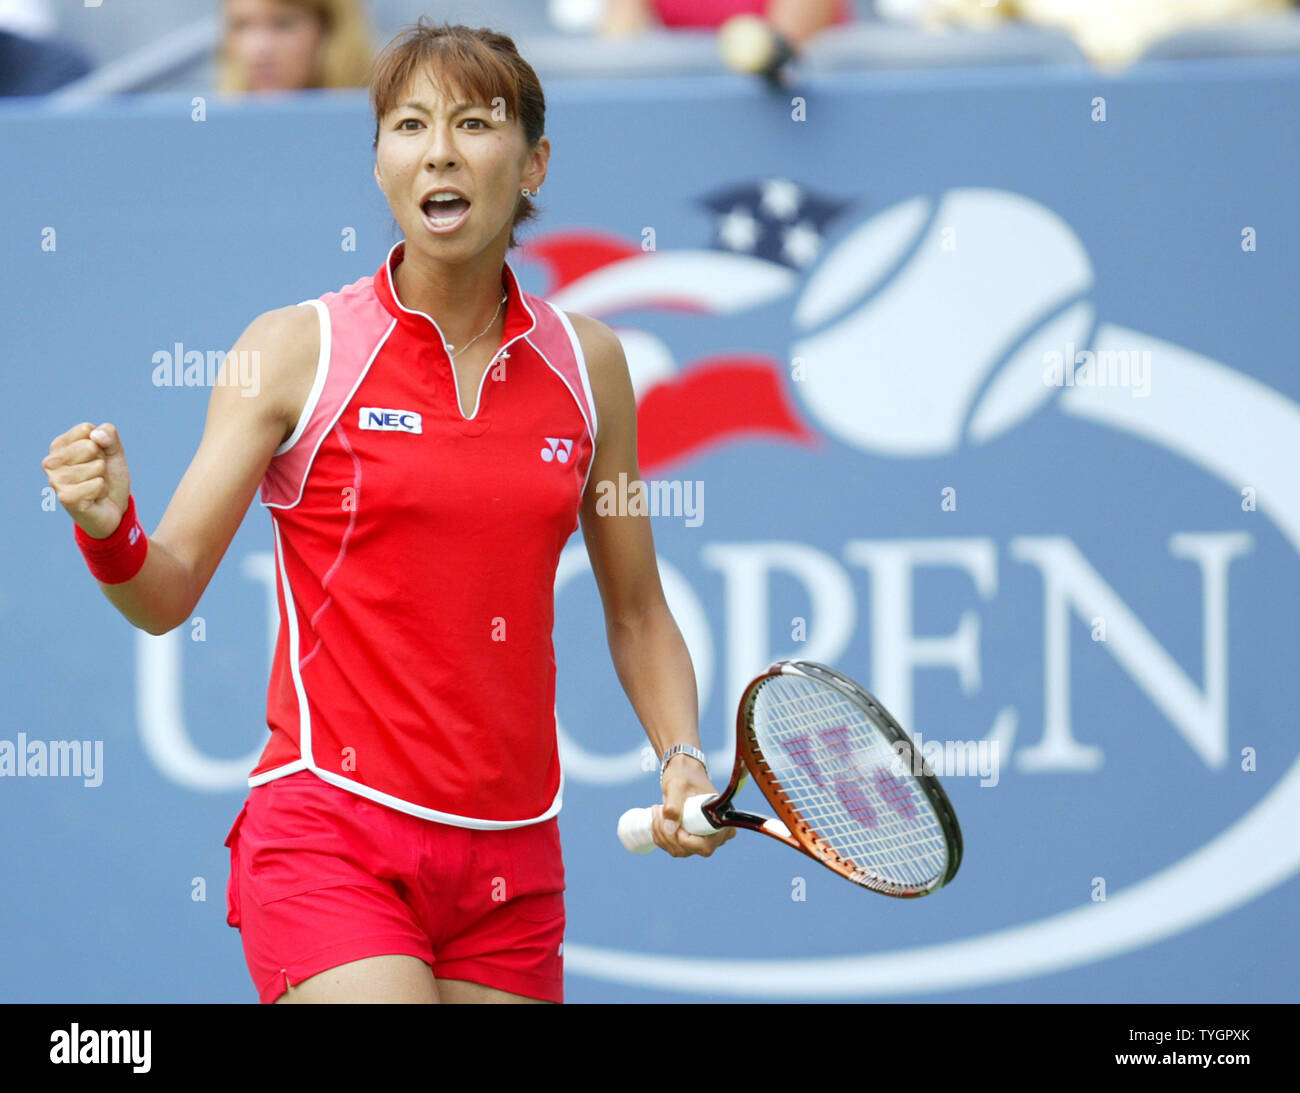 Shinobu Asagoe (JPN) pumps her fist while on route to defeating Eleni Daniilidou (GRE) in 3 sets during day 8 action at the US Open in Flushing, New York on September 6, 2004.    (UPI Photo/John Angelillo) Stock Photo